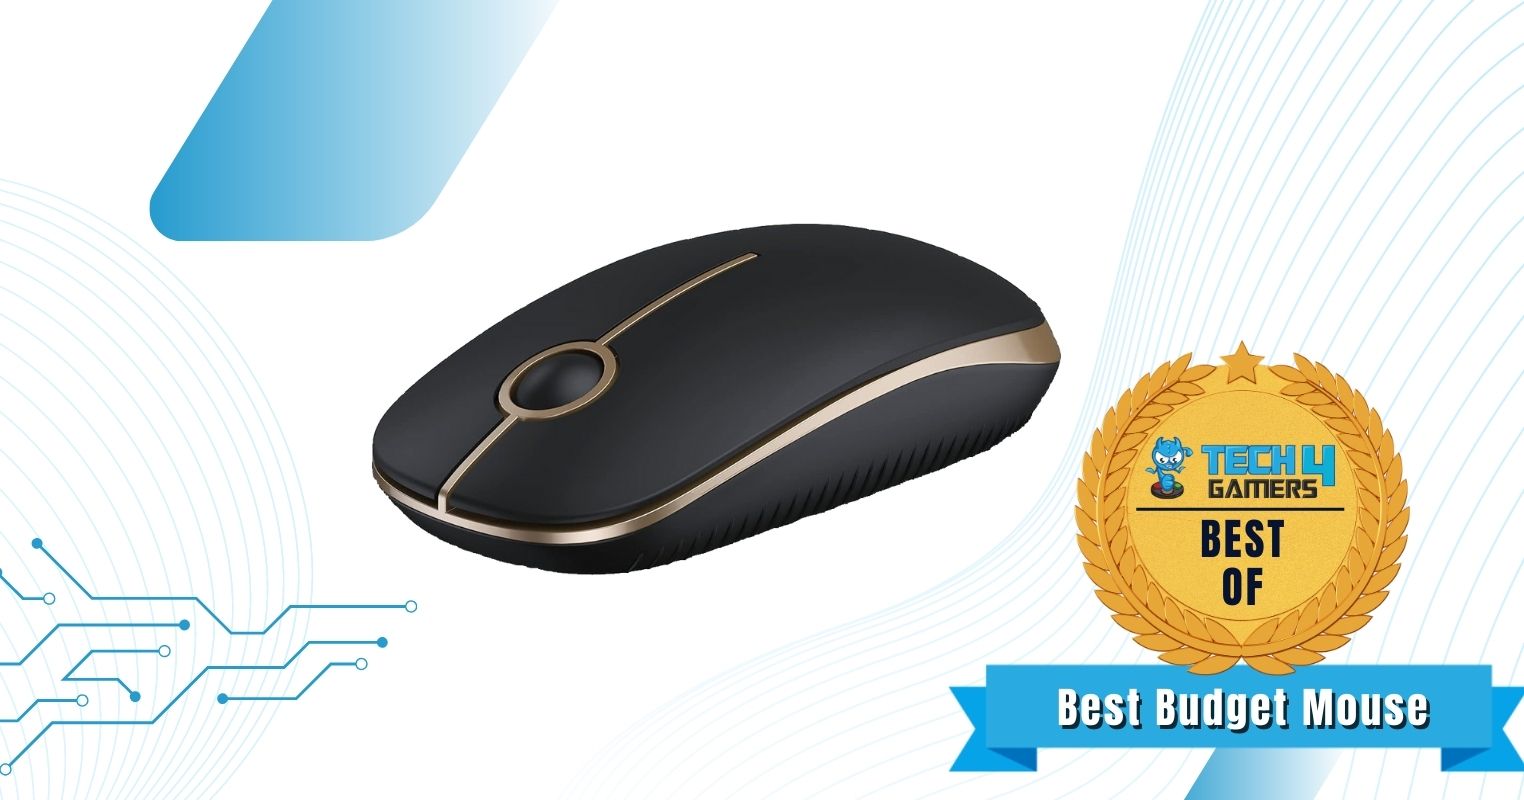 Best Budget Mouse For Graphic Designing - Vssoplar Wireless Mouse